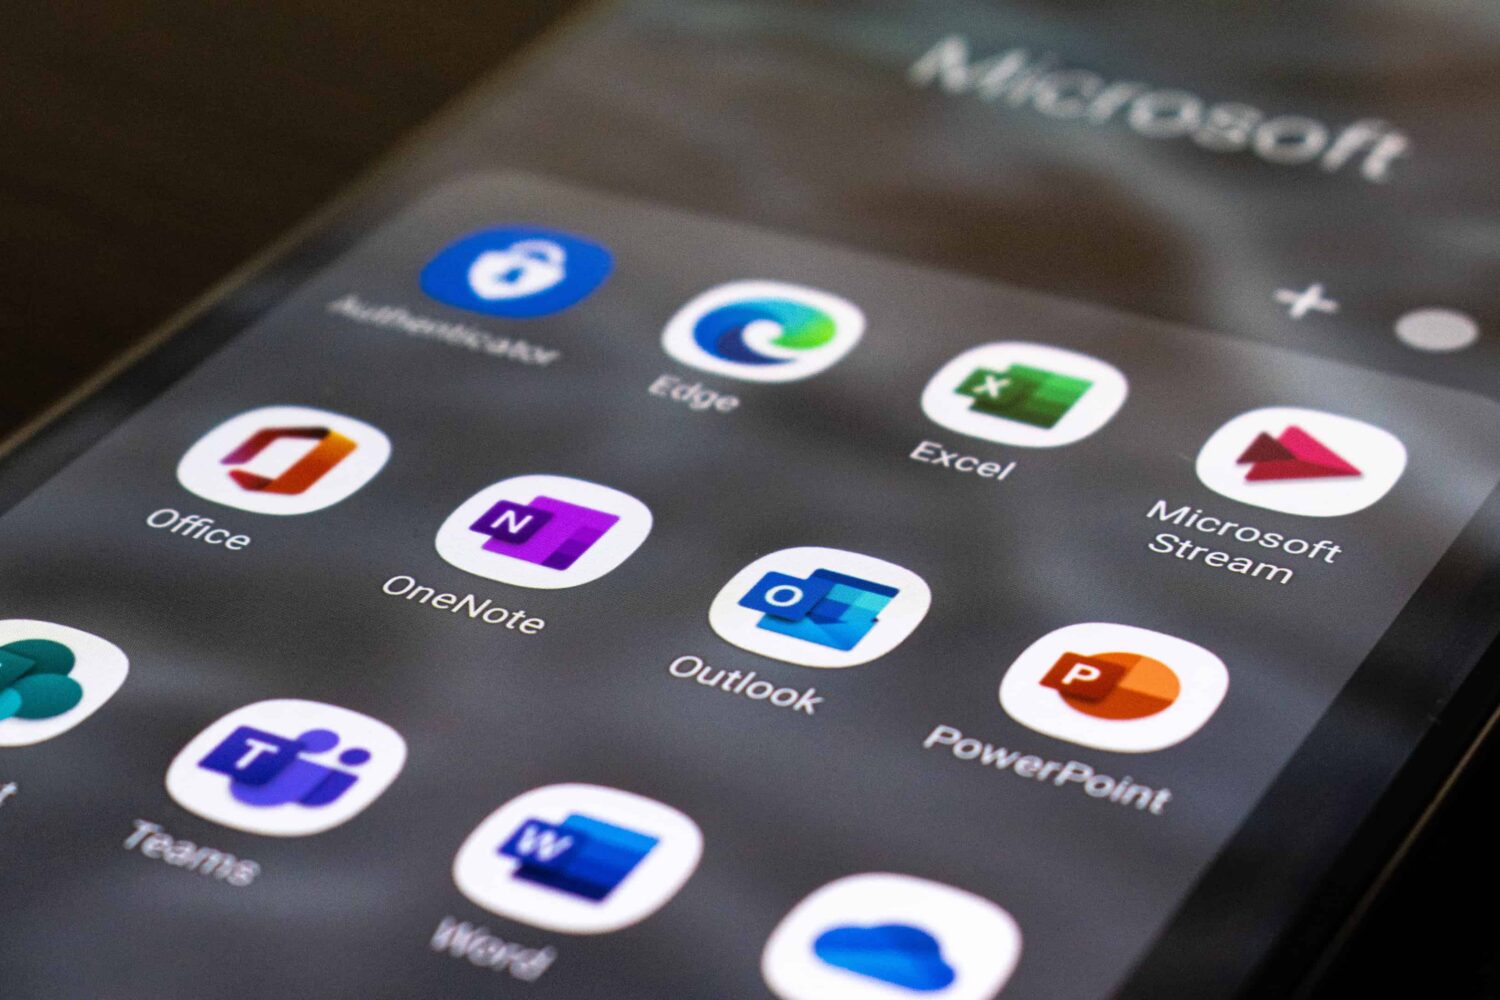 An iPhone home screen showing a Microsoft folder full of icons of Office productivity apps